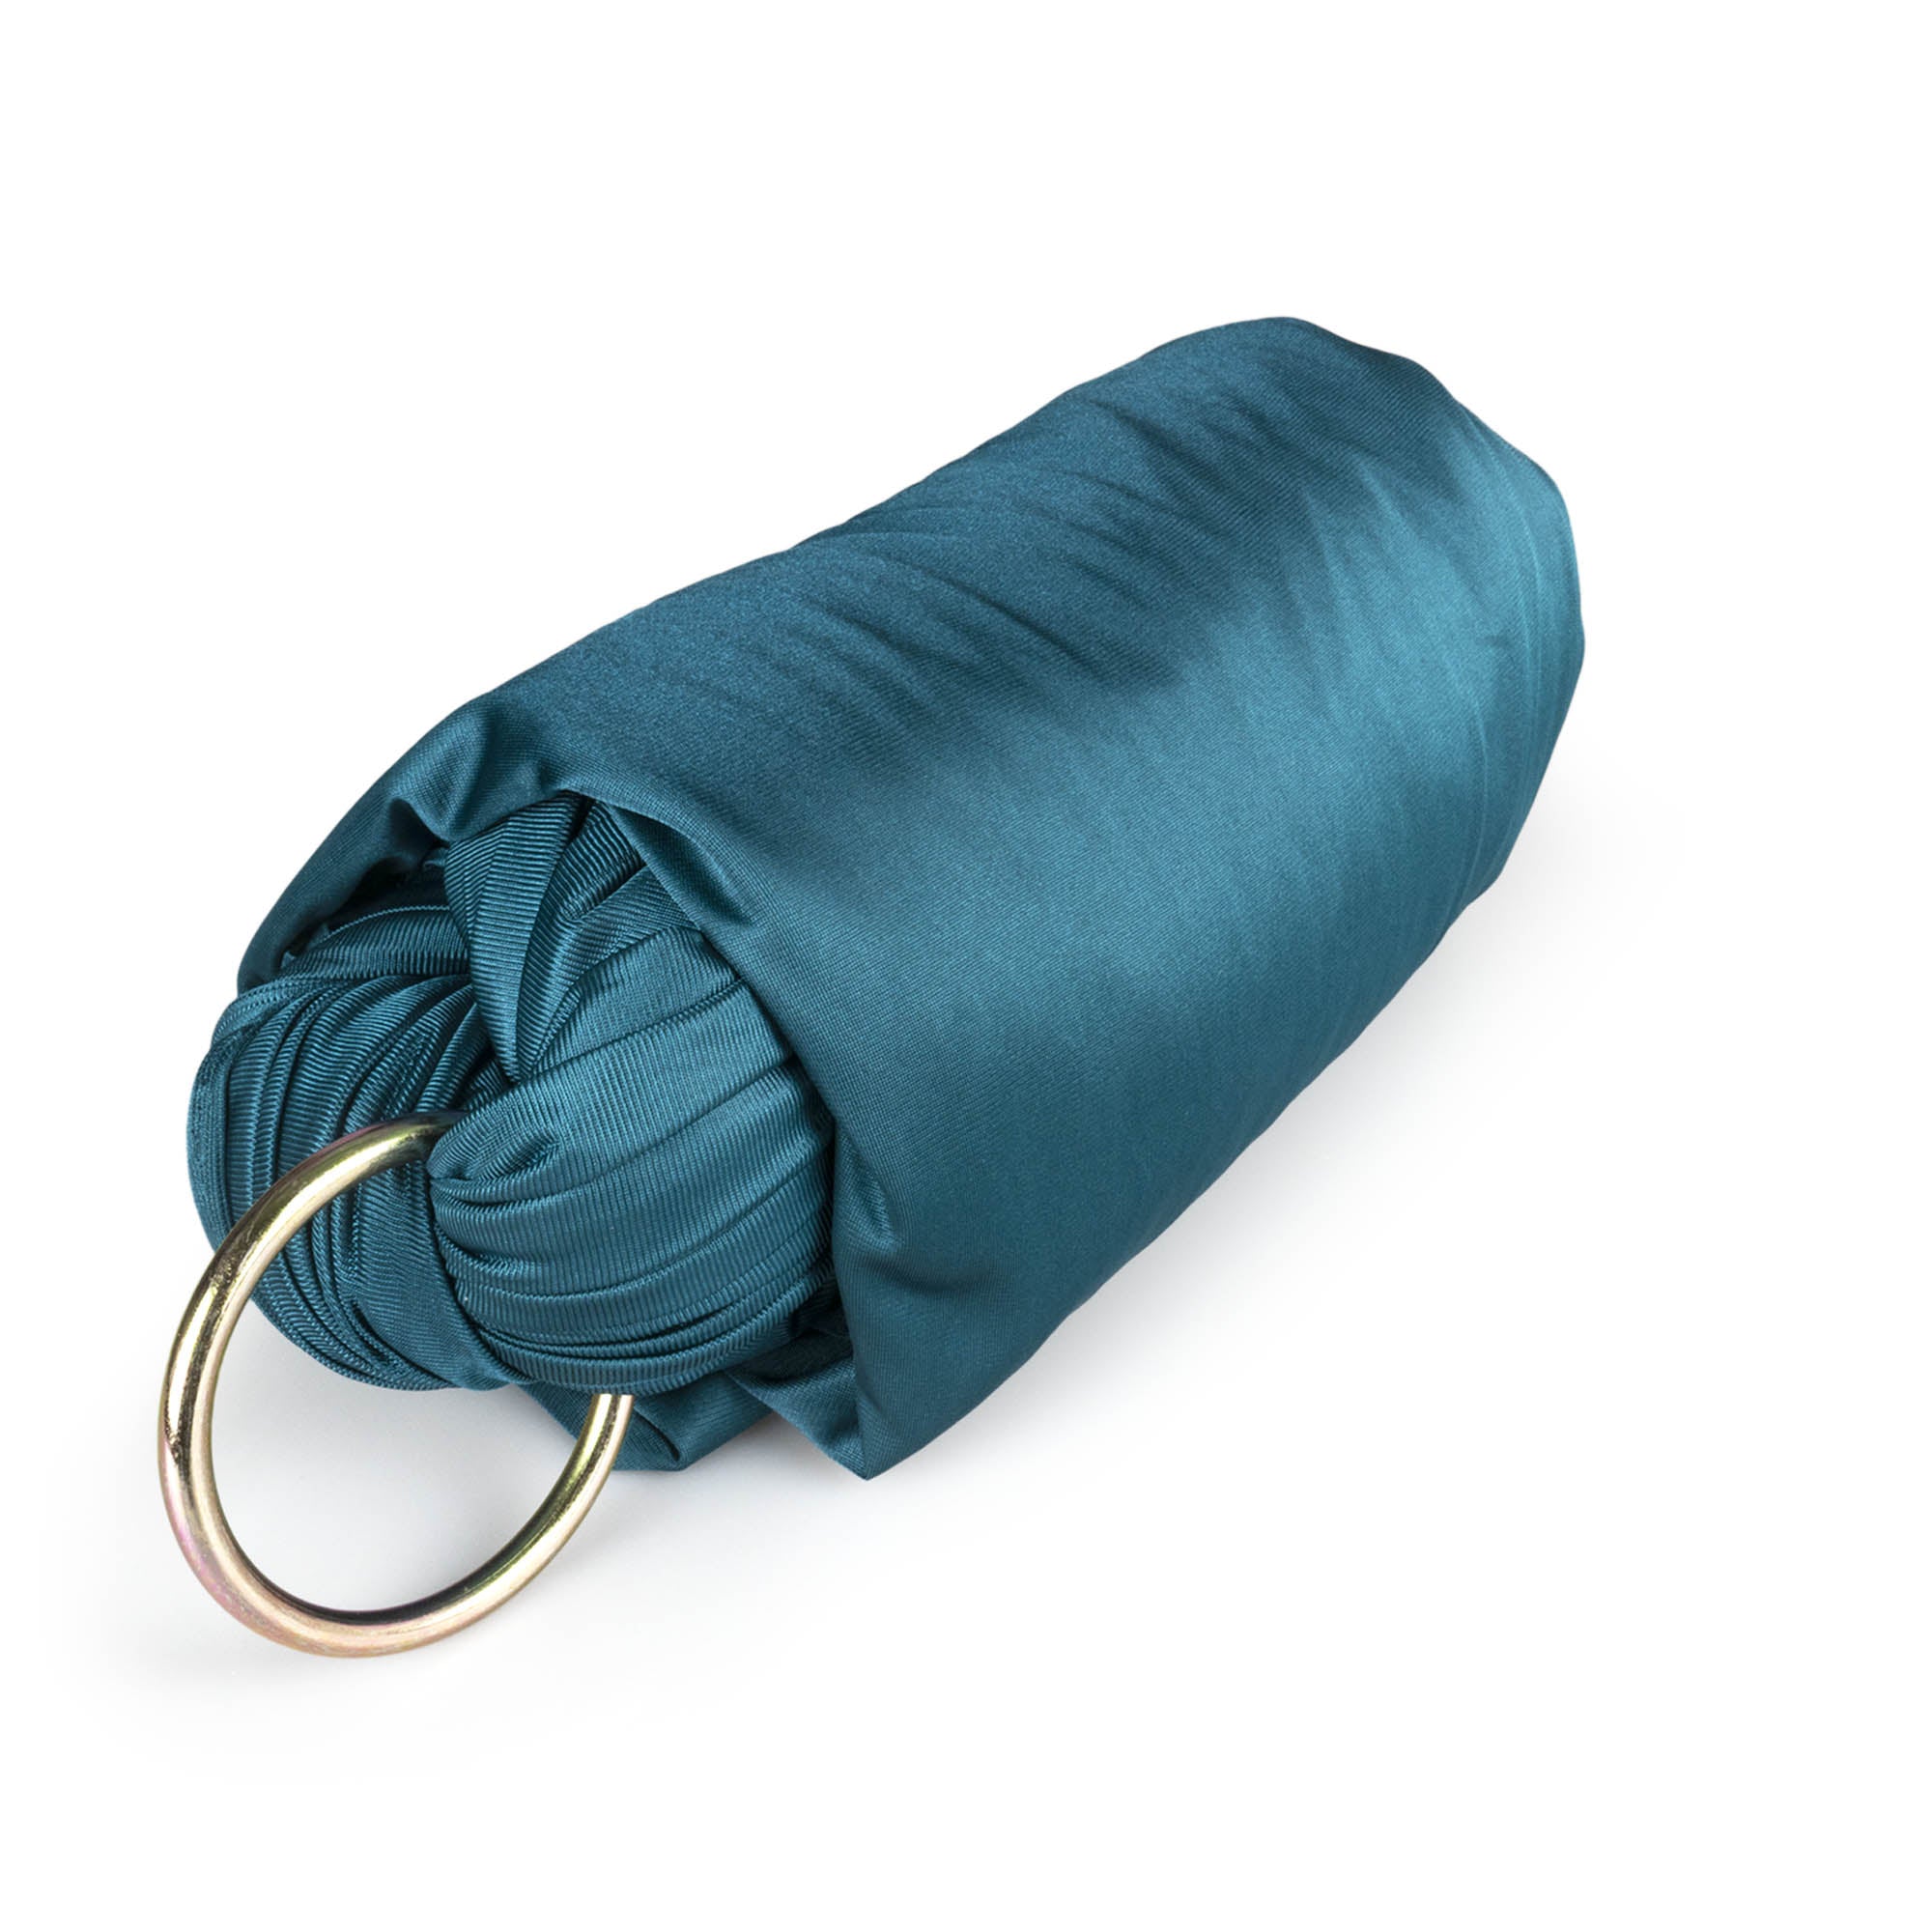 Dark pine green yoga hammock with O rings attached